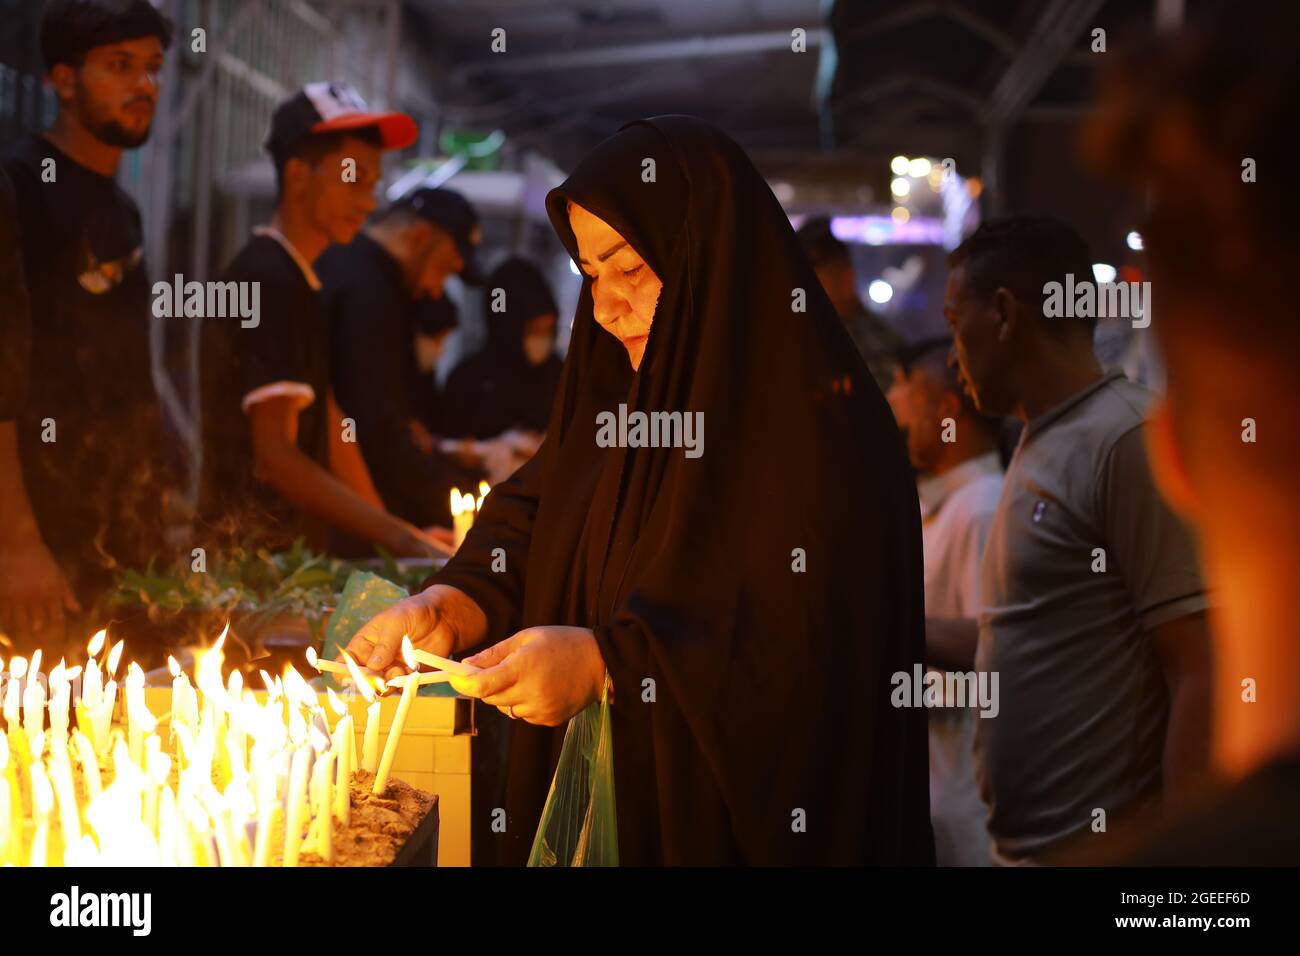 Karbala, Iraq. 19th Aug, 2021. A Shiite Muslim woman lights candles at the Imam Abbas shrine in Iraq's holy city of Karbala on Ashura Day on the 10th of Muharram, the first month of the Islamic calendar. Muharram is considered a month of mourning and remembrance for Shiite Muslims around the world, in which they commemorate the martyrdom of the grandson of the Islamic prophet Mohammad, Husayn ibn Ali, who was killed in the 7th century Battle of Karbala. Credit: Ameer Al Mohammedaw/dpa/Alamy Live News Stock Photo